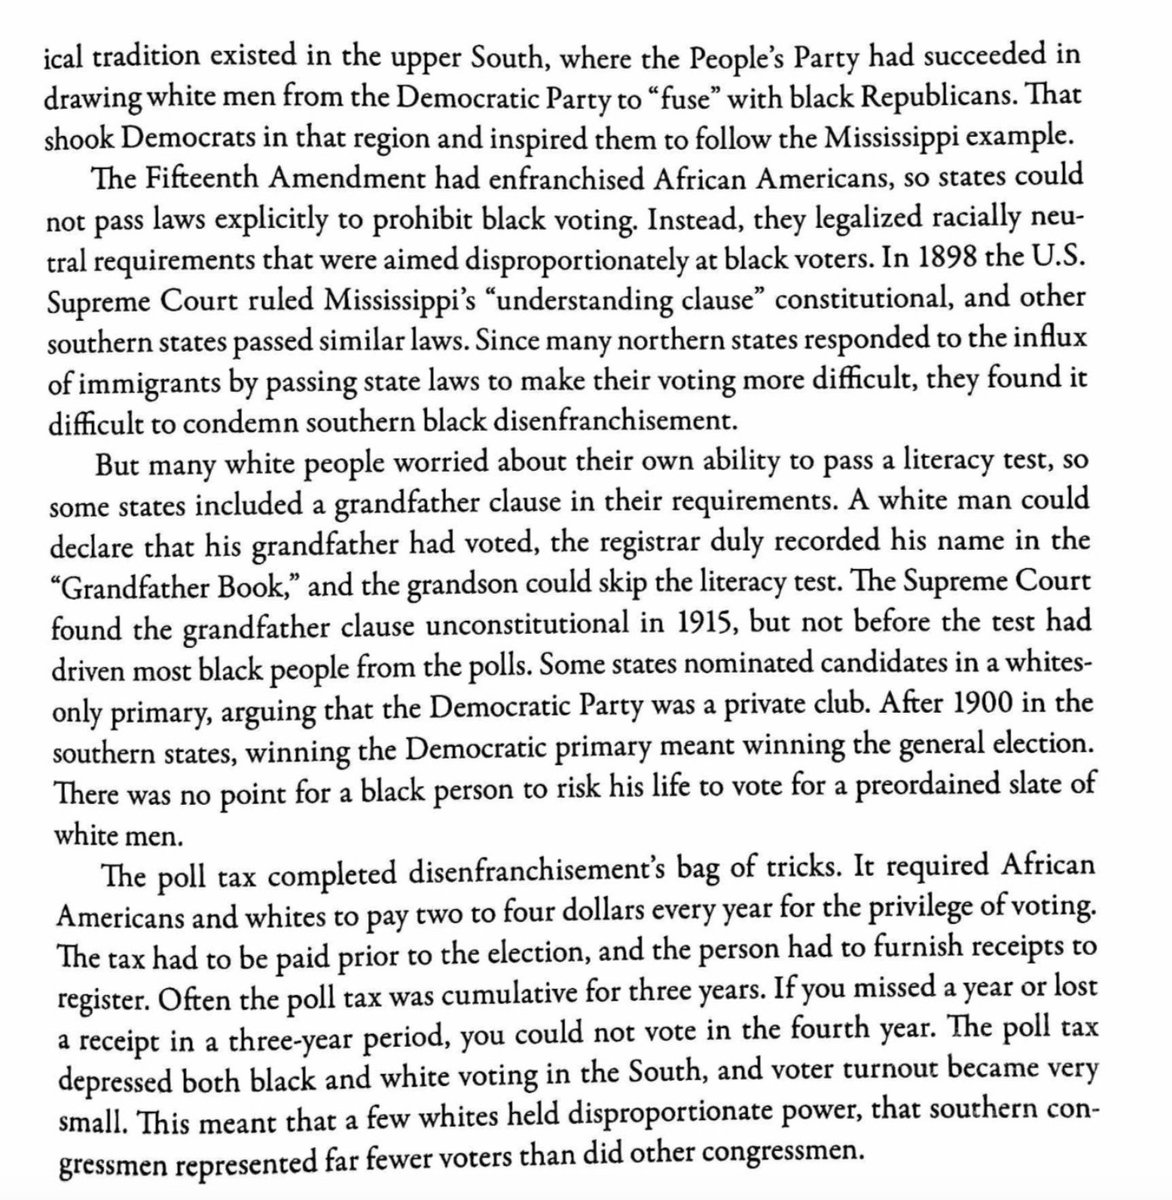 Well, let's try These United States, a recent textbook by progressive historians  @GilmoreGlenda and  @TomSugrue. I'm sure *they* hid Democrats' role as the party of white supremacy in the South, because --Nope.